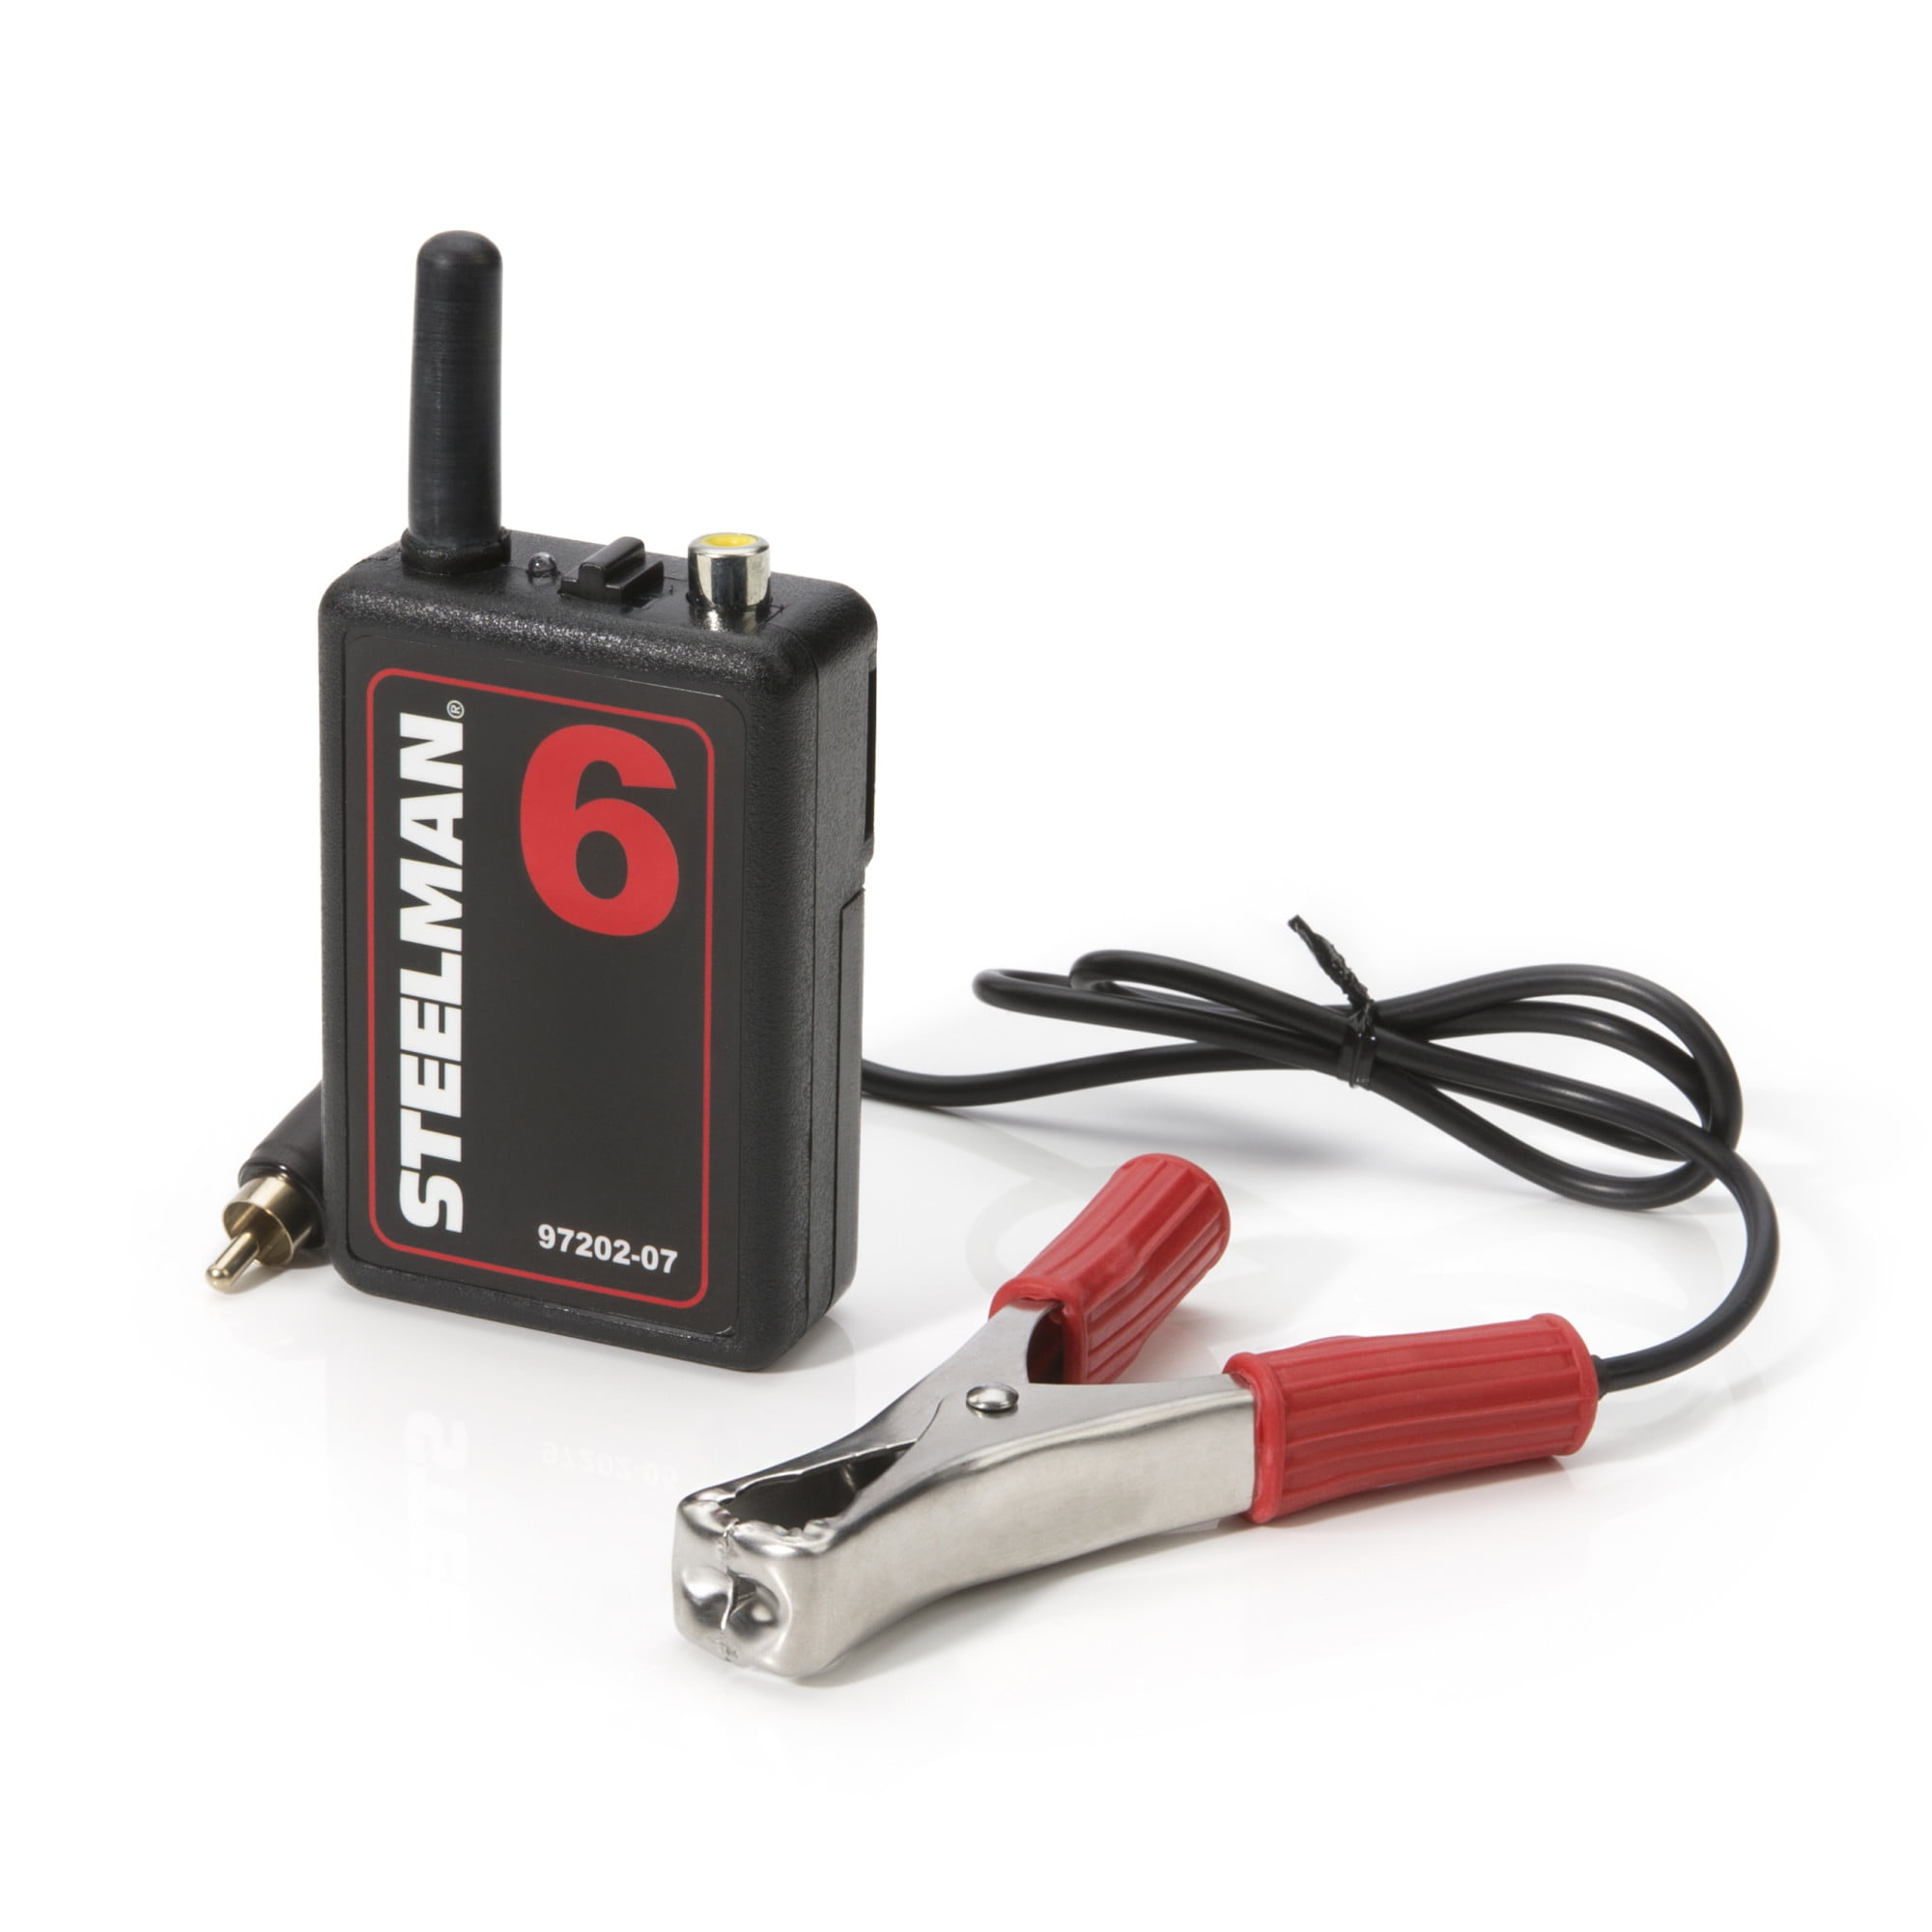 Steelman 97202-07 Wireless ChassisEAR Transmitter #6 with Clamp 